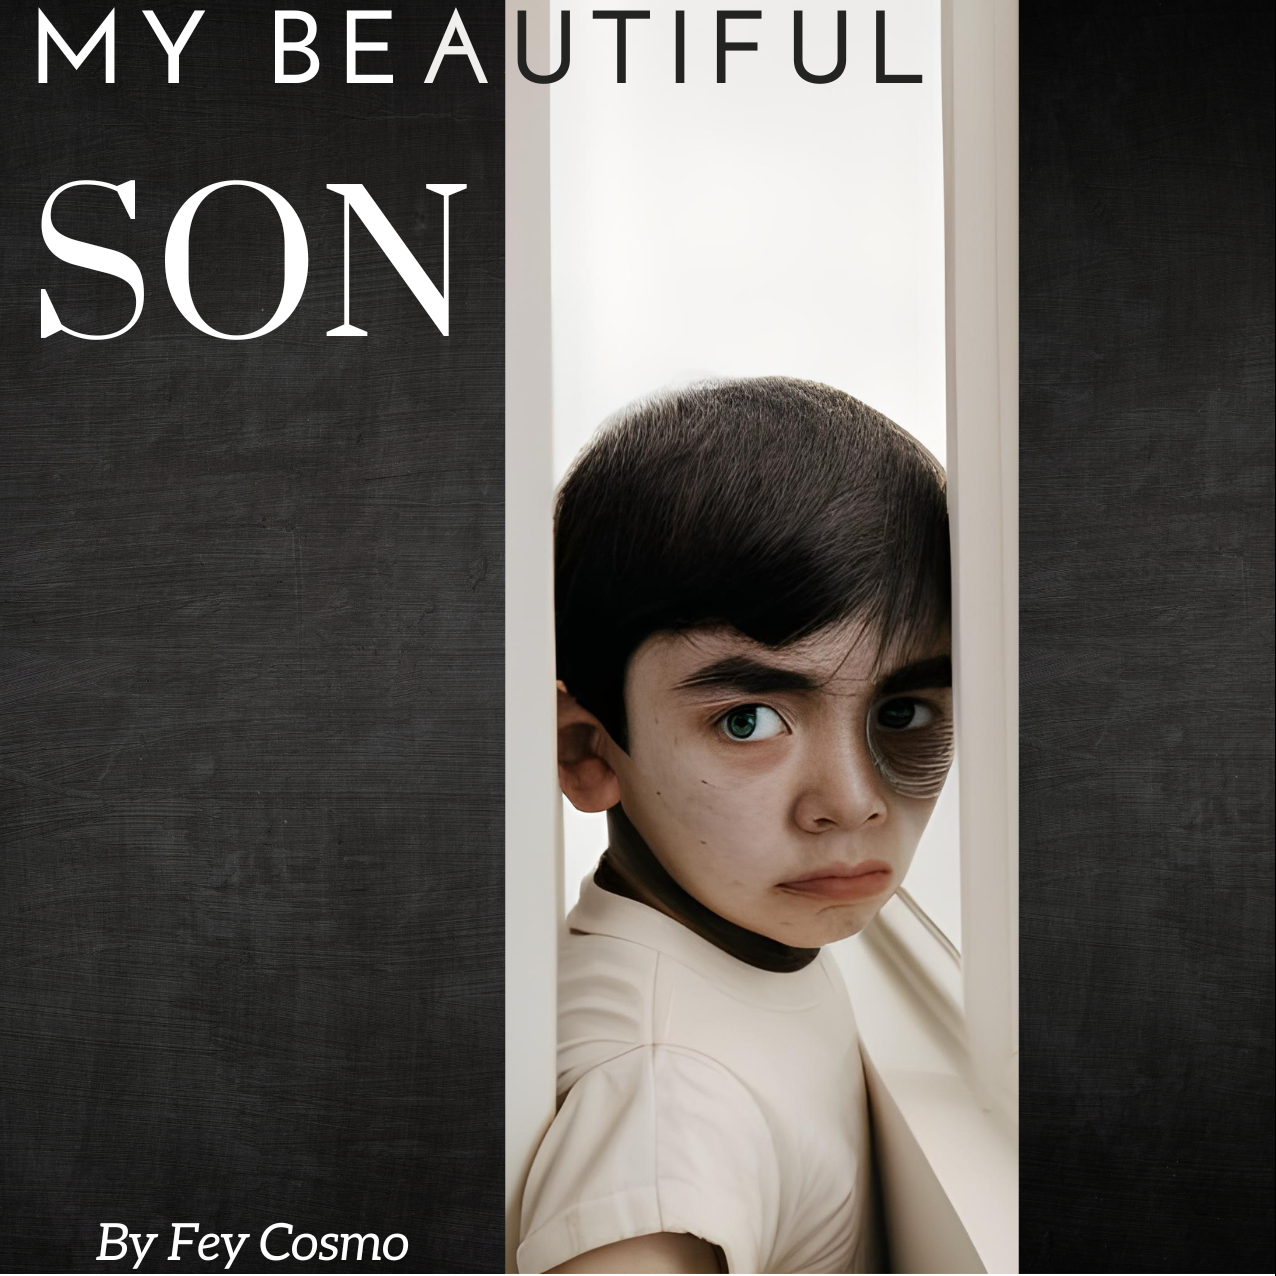 My Beautiful Son: A tale of horror (PART ONE)